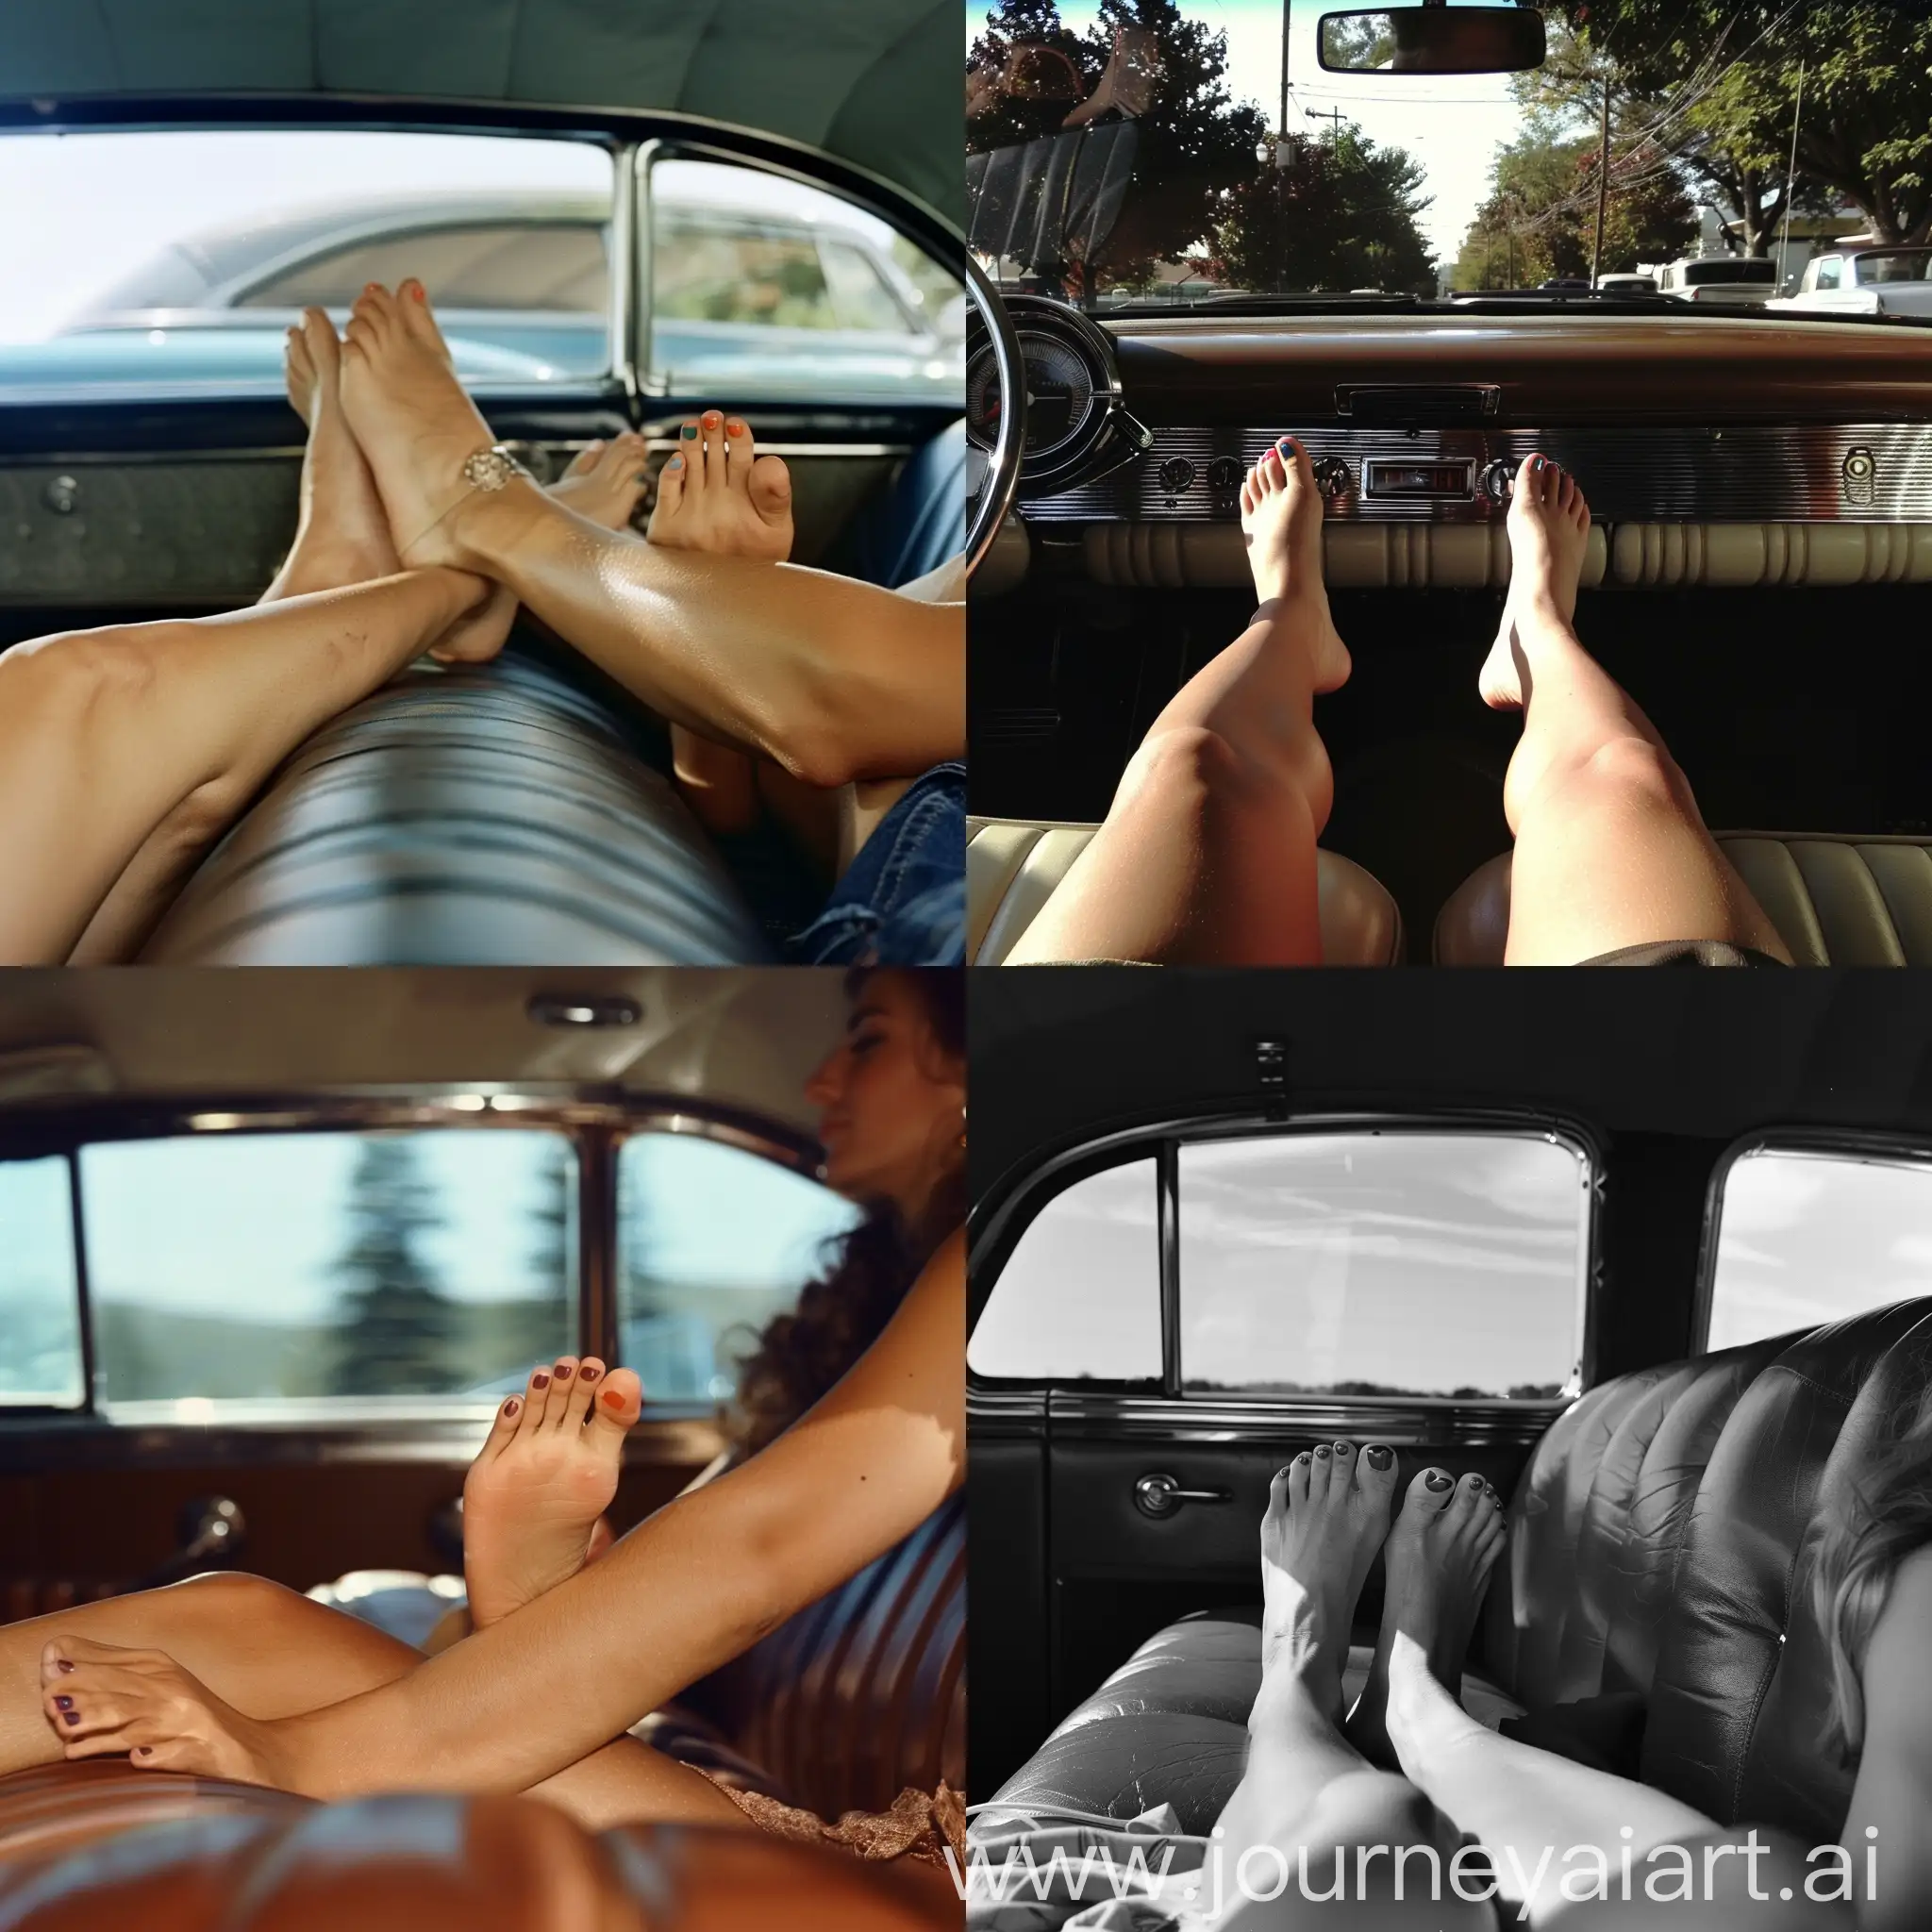 POV of sitting in the back seat of a classic car, a young woman's feet resting on my lap, no shoes, painted toe nails, cross legged